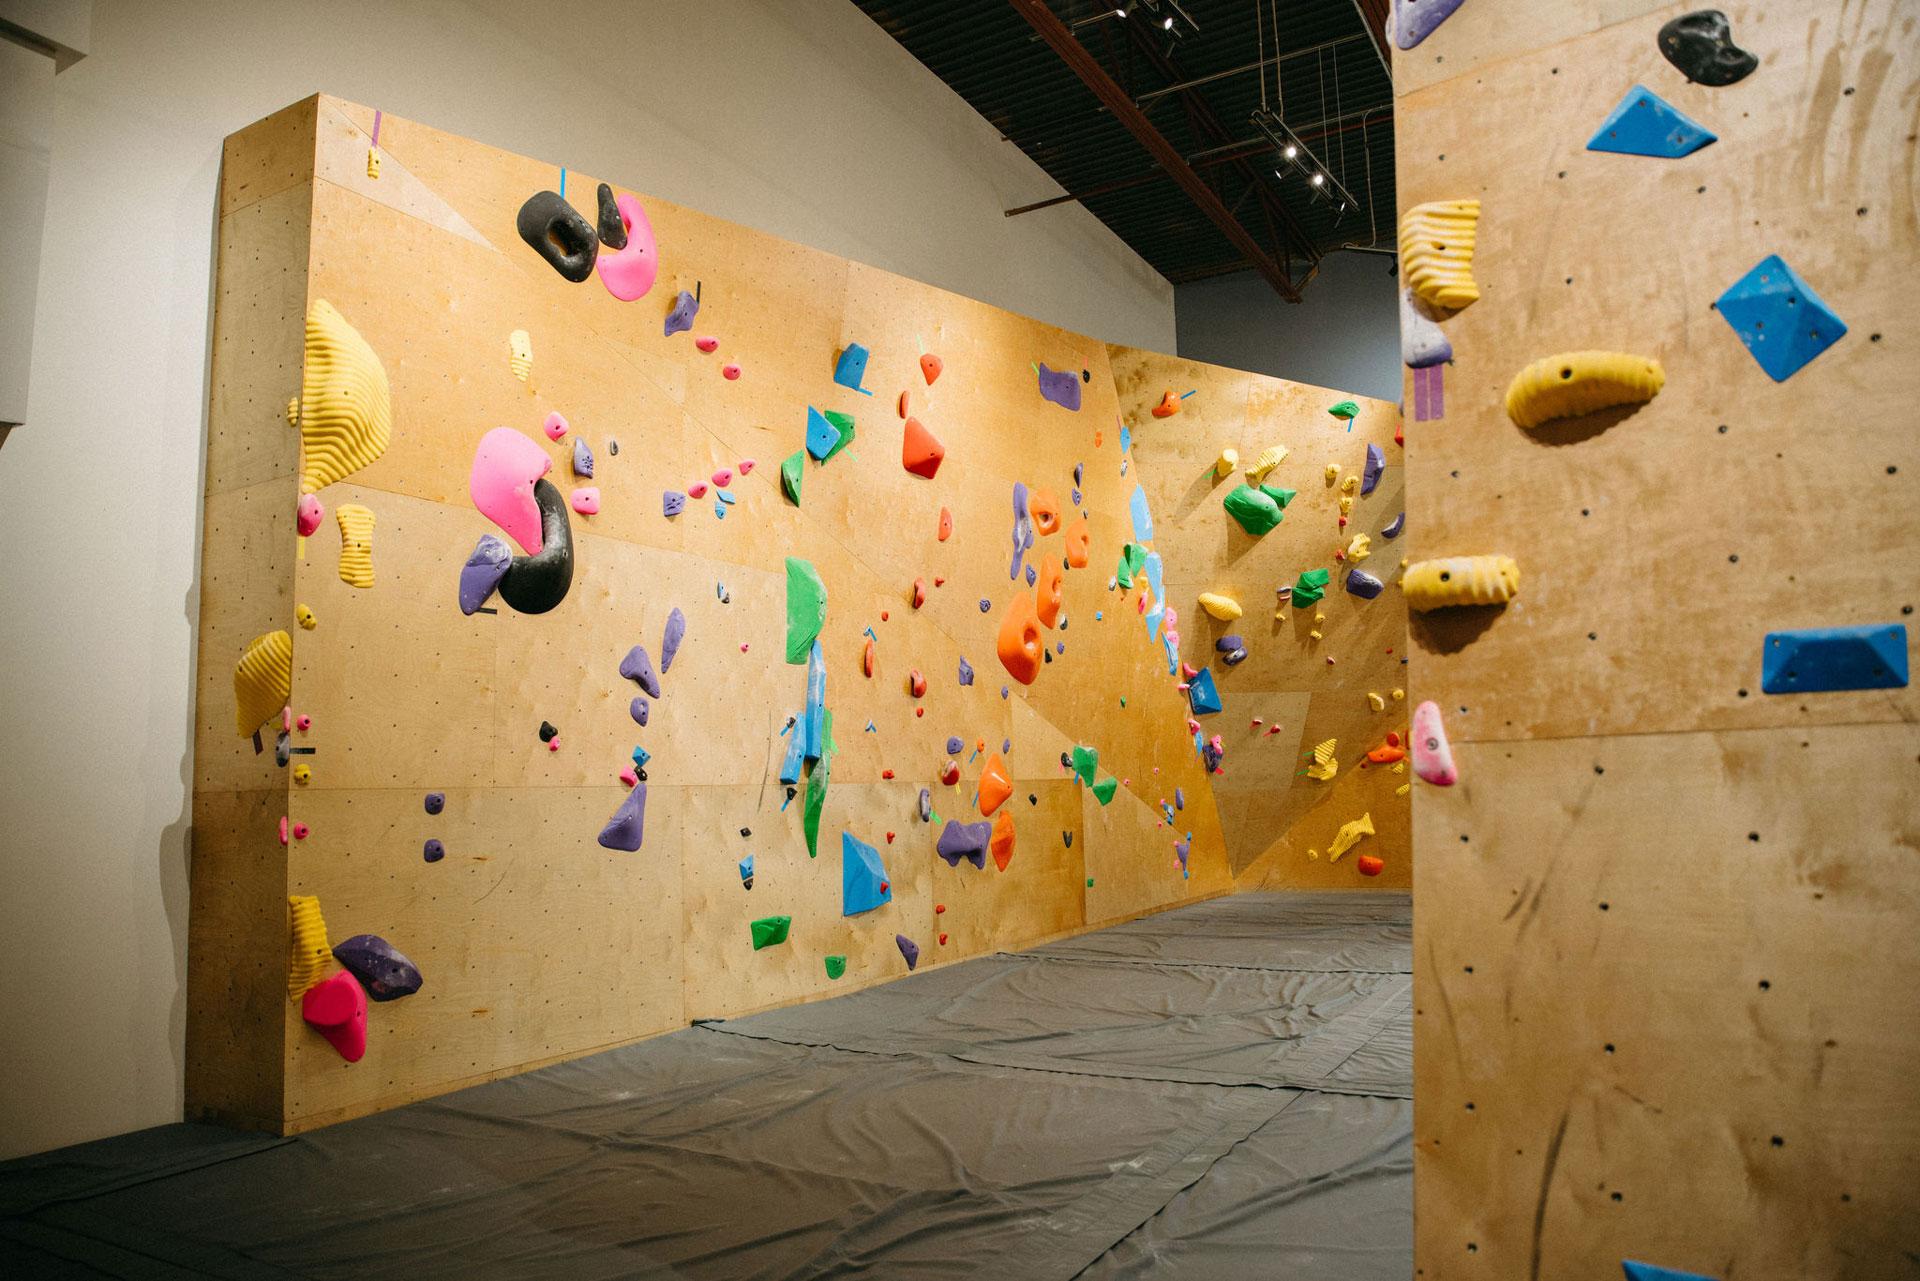 Some of the bouldering walls at Summit City